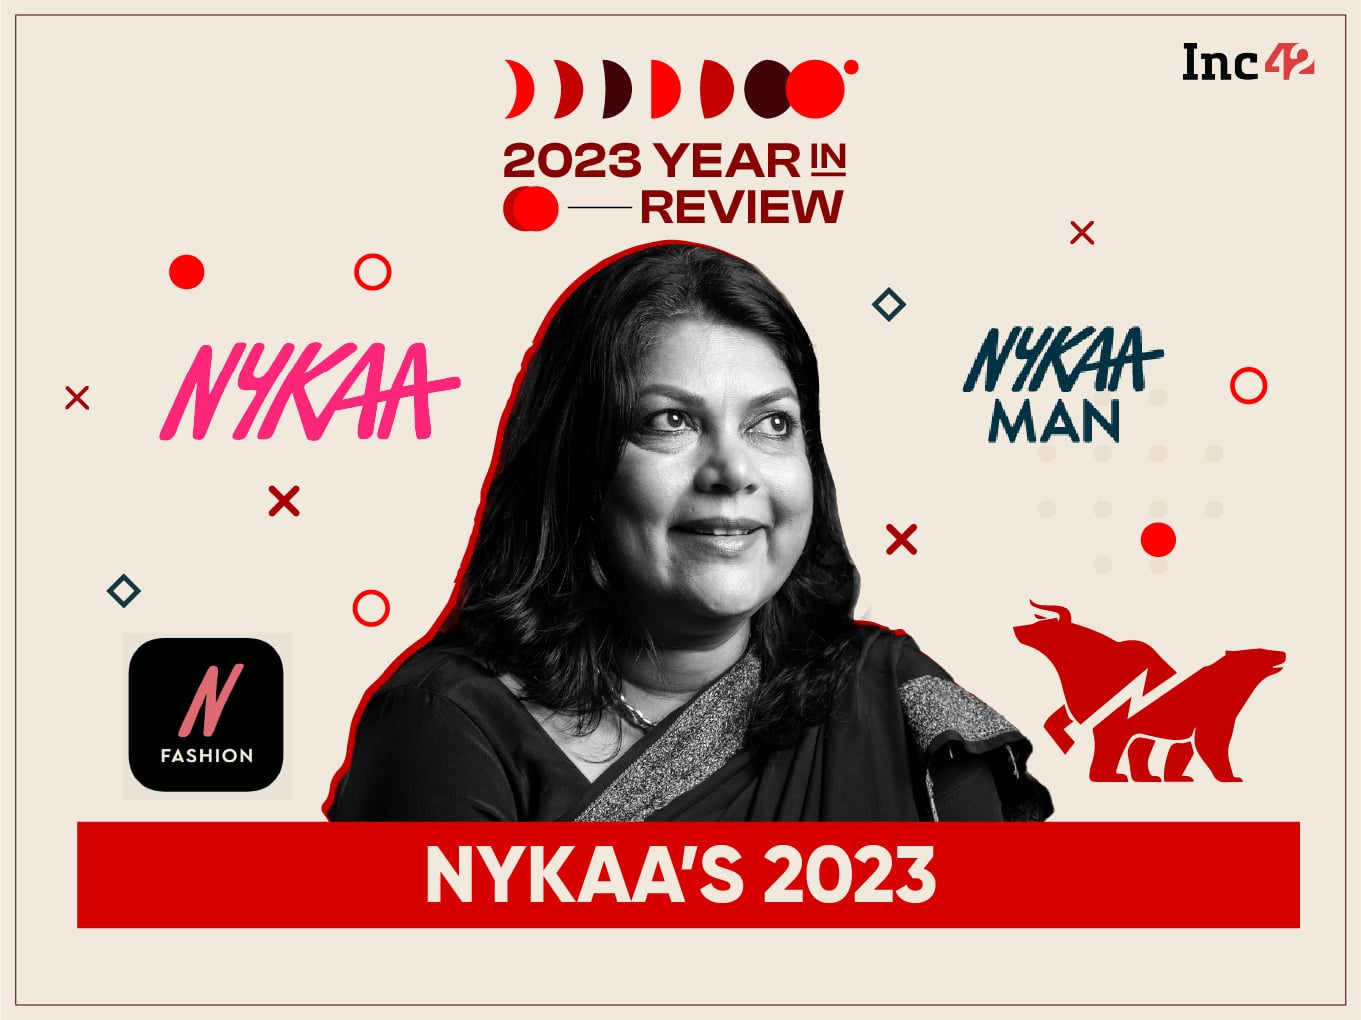 Losing Sheen? Decoding Nykaa's Volatile 2023 & Calling Out The